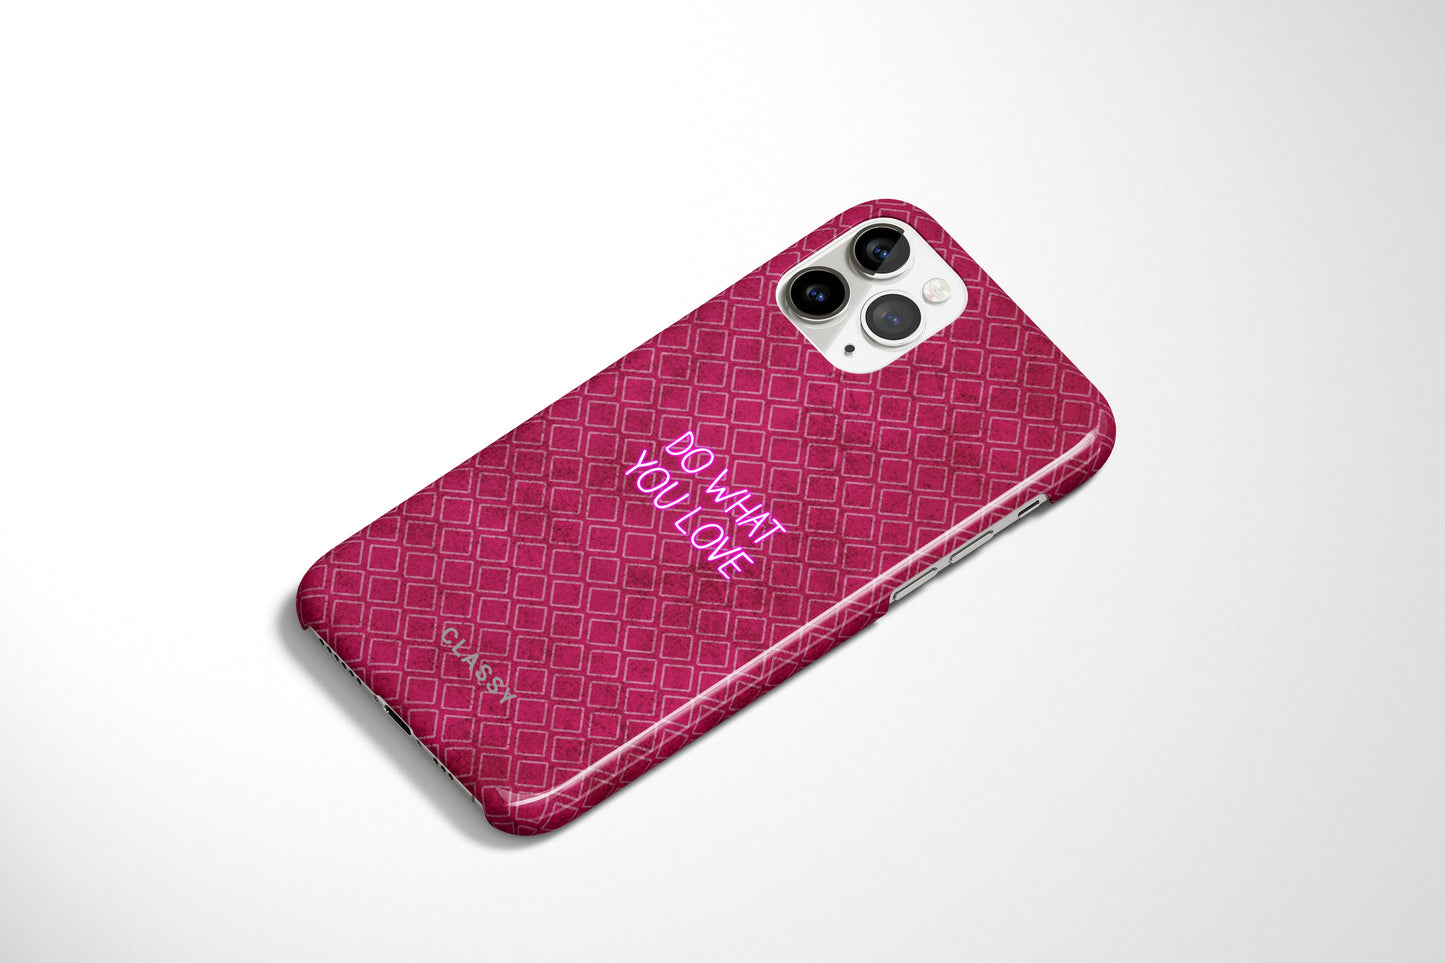 Do What You Love Snap Case - Classy Cases